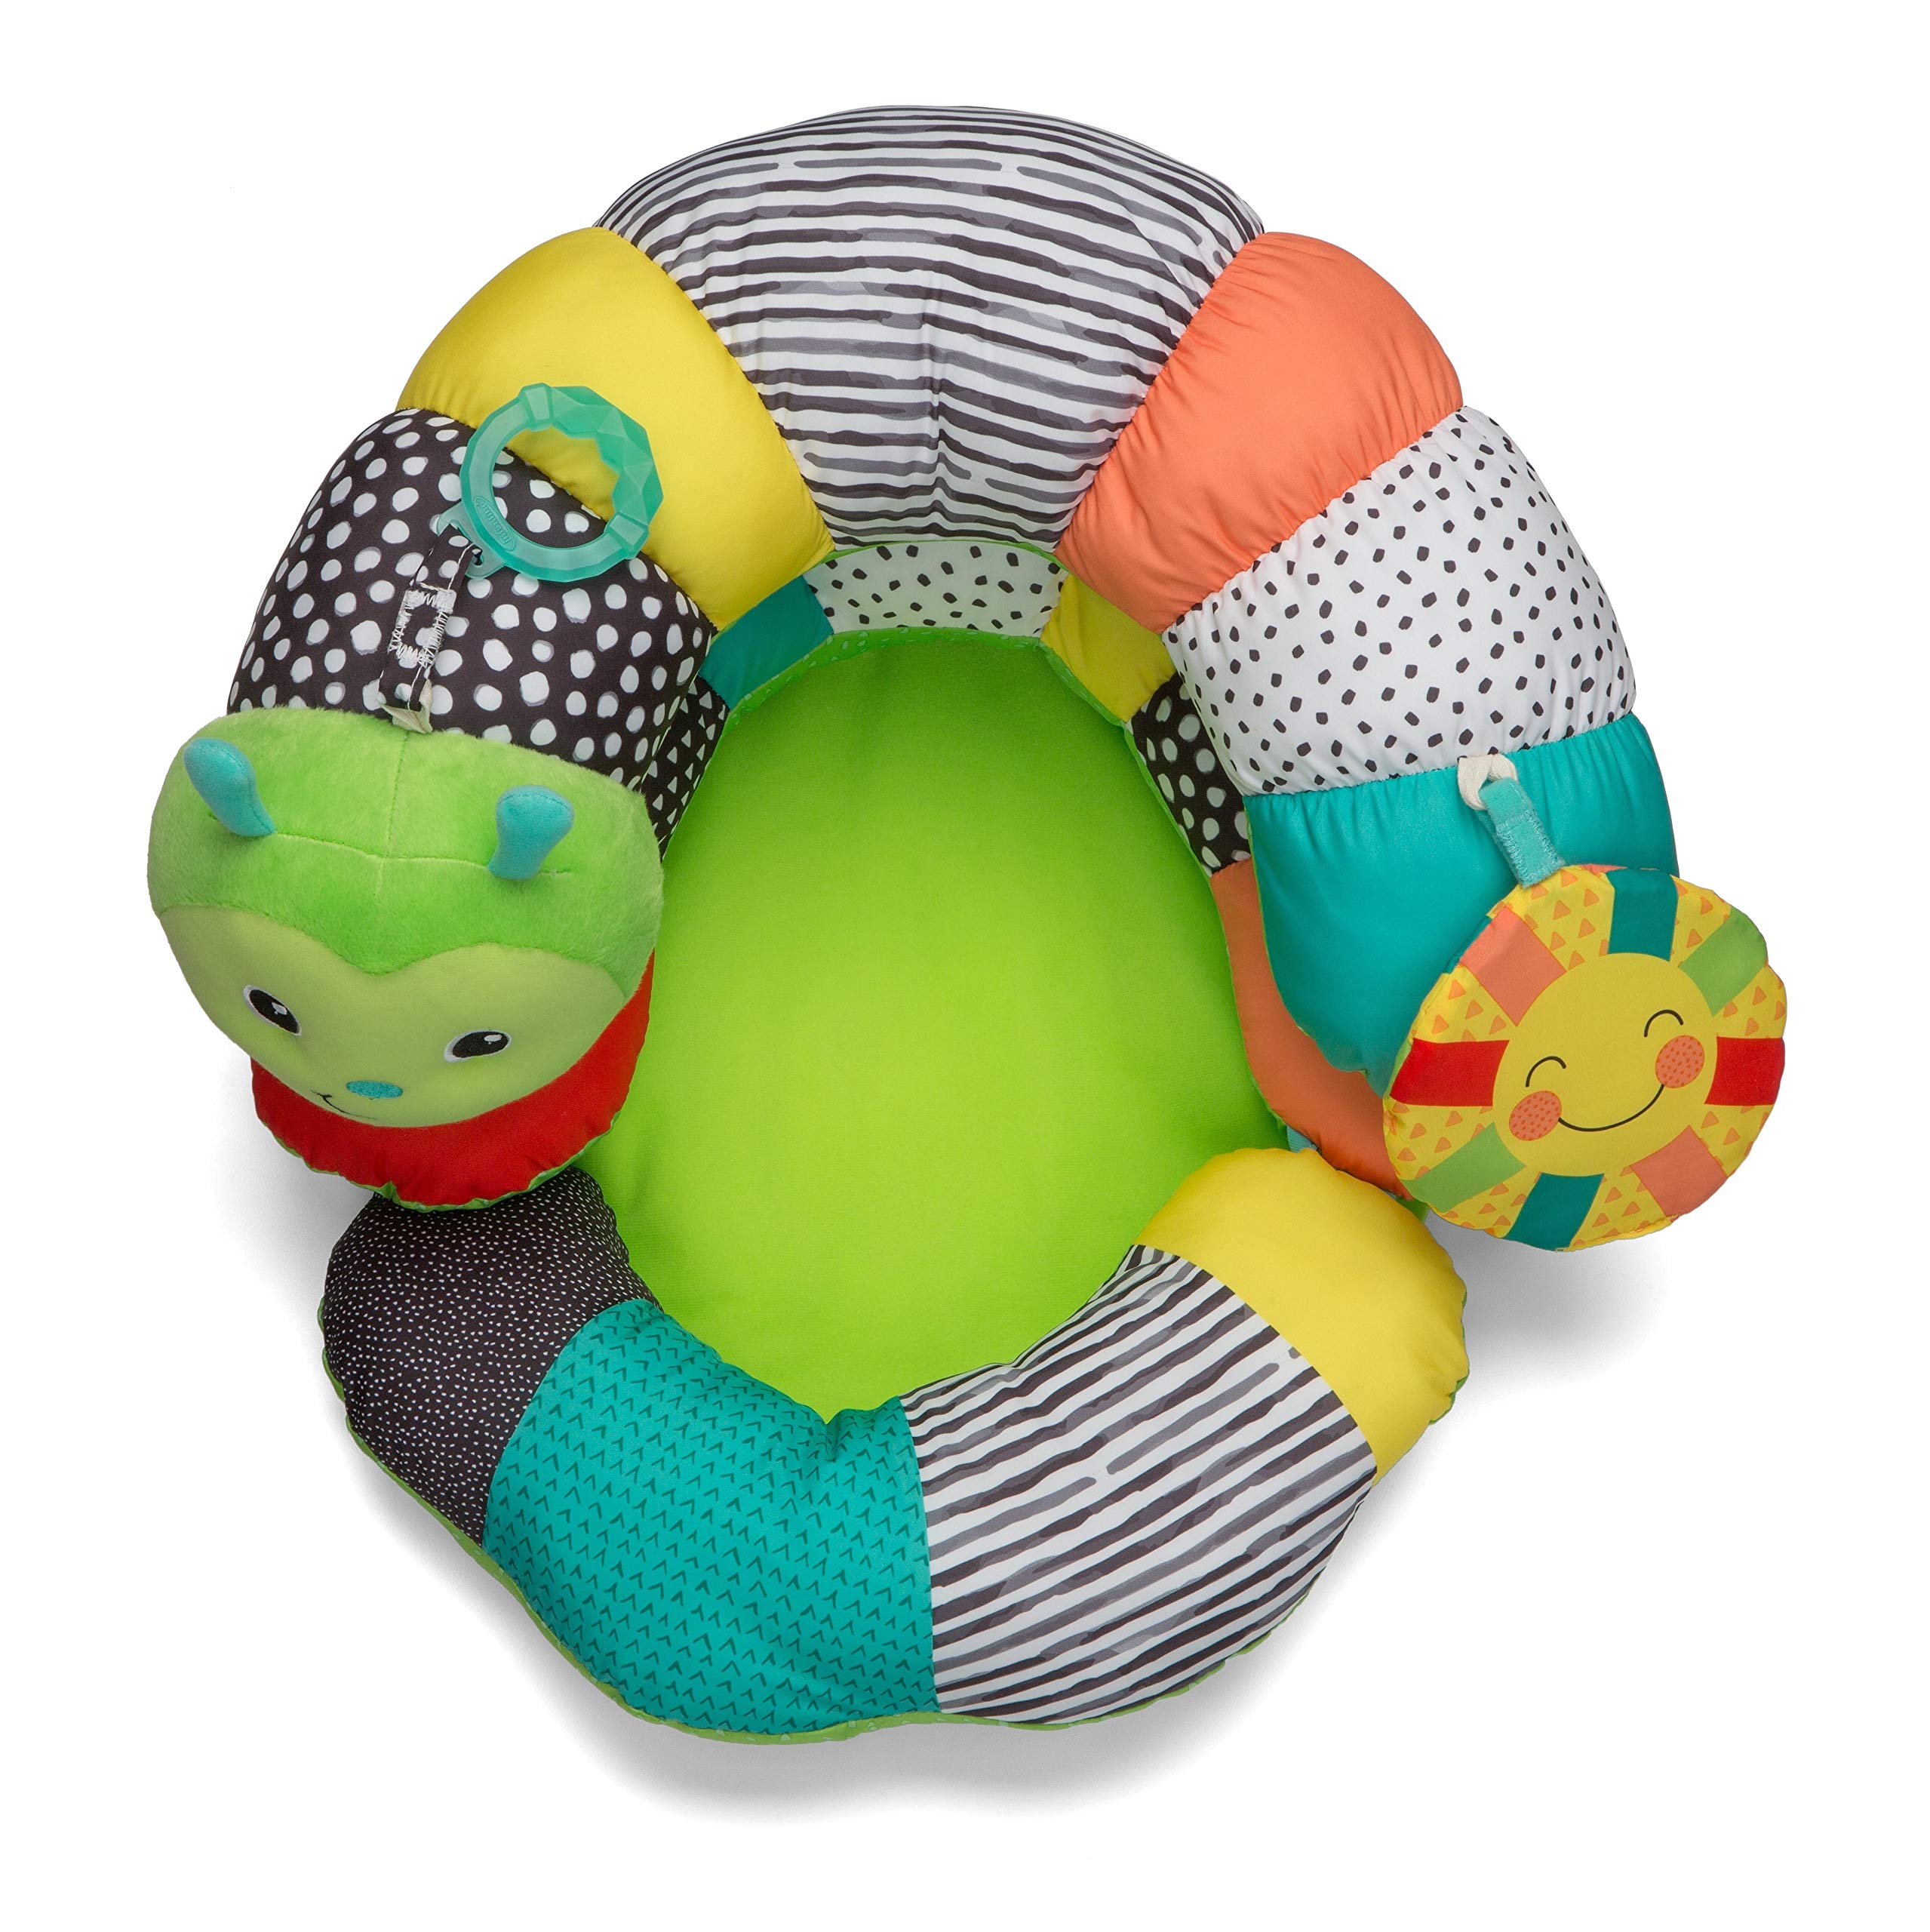 Infantino Prop-A-Pillar Tummy Time & Seated Support - Pillow Support for Newborn and Older Babies, with Detachable Support Pillow and Toys, 3 Piece Set (Pack of 1)